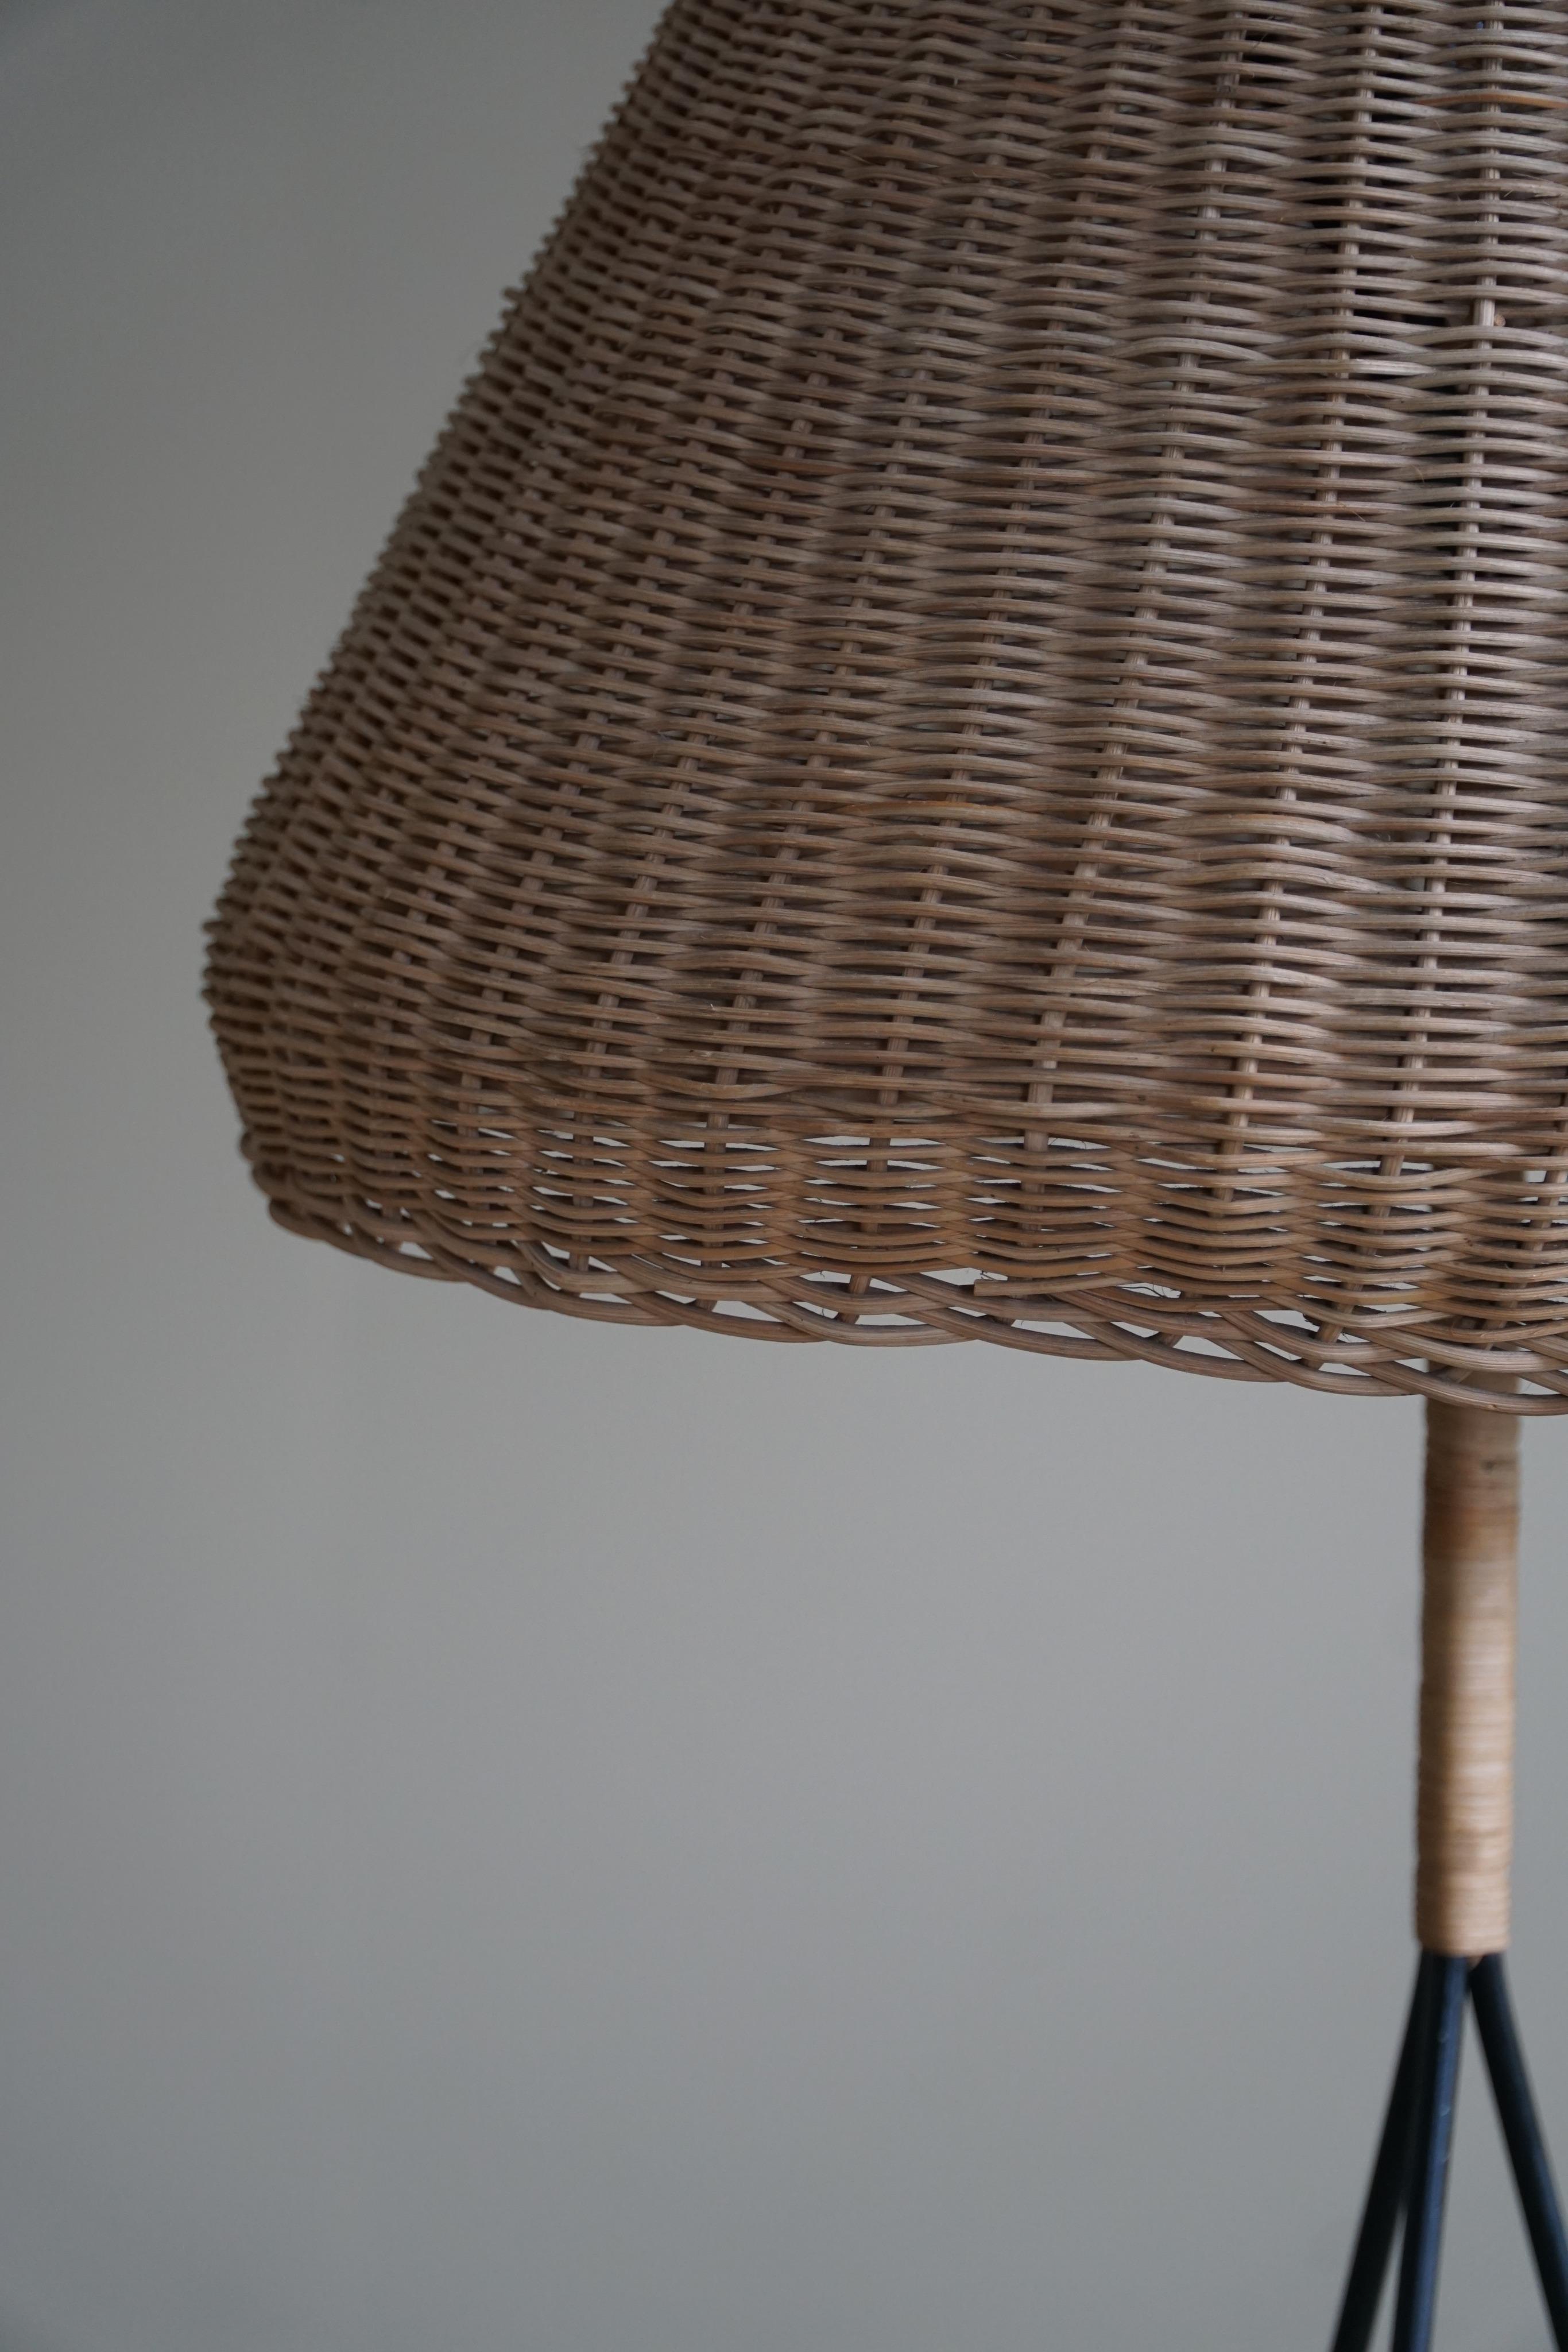 French Modern, Floor Lamp in Rattan and Steel, Mid Century, 1960s For Sale 6